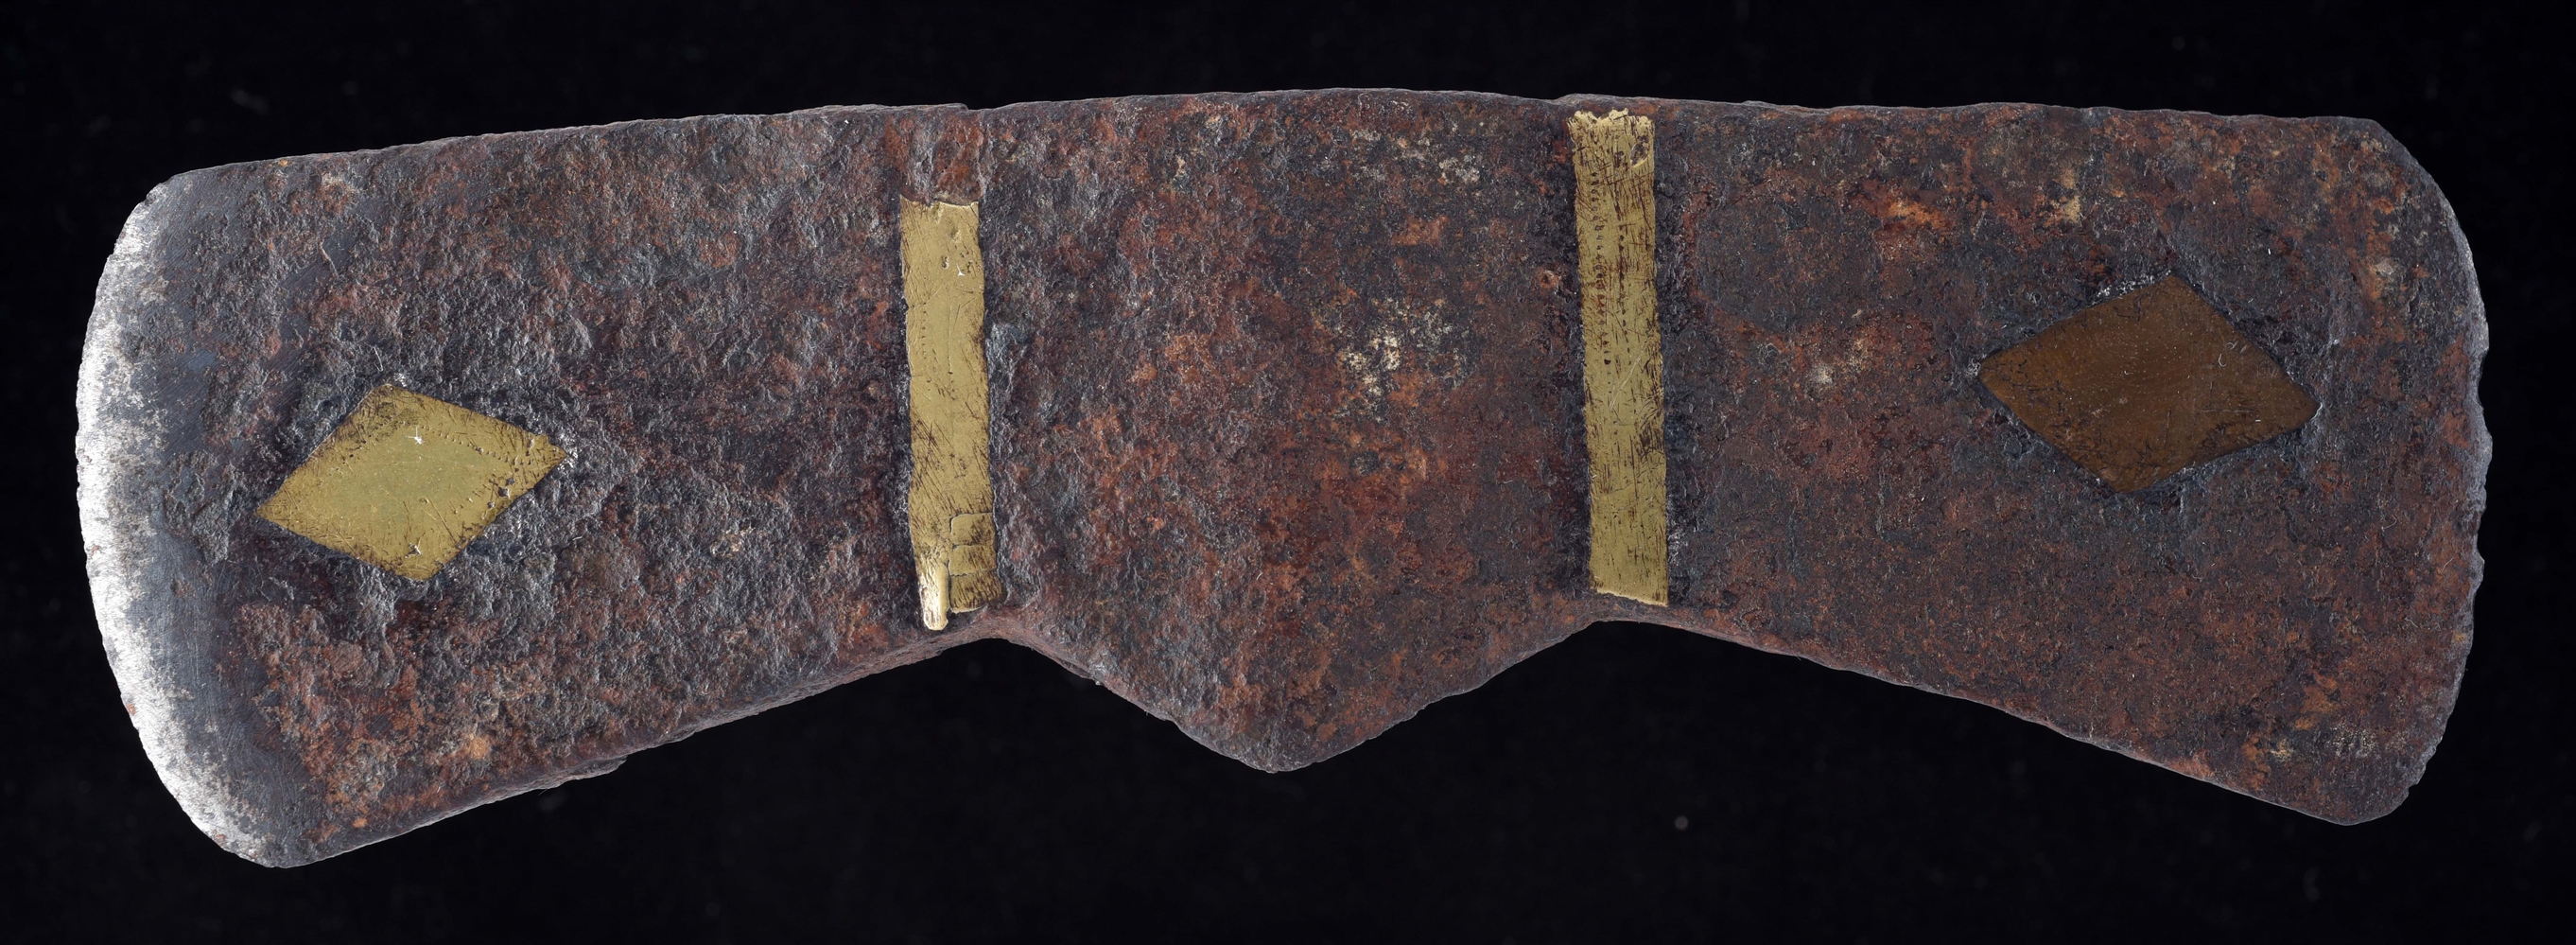 SMALL AND UNUSUAL 18TH CENTURY DOUBLE EDGED TOMAHAWK HEAD WITH GOLD INLAYS.